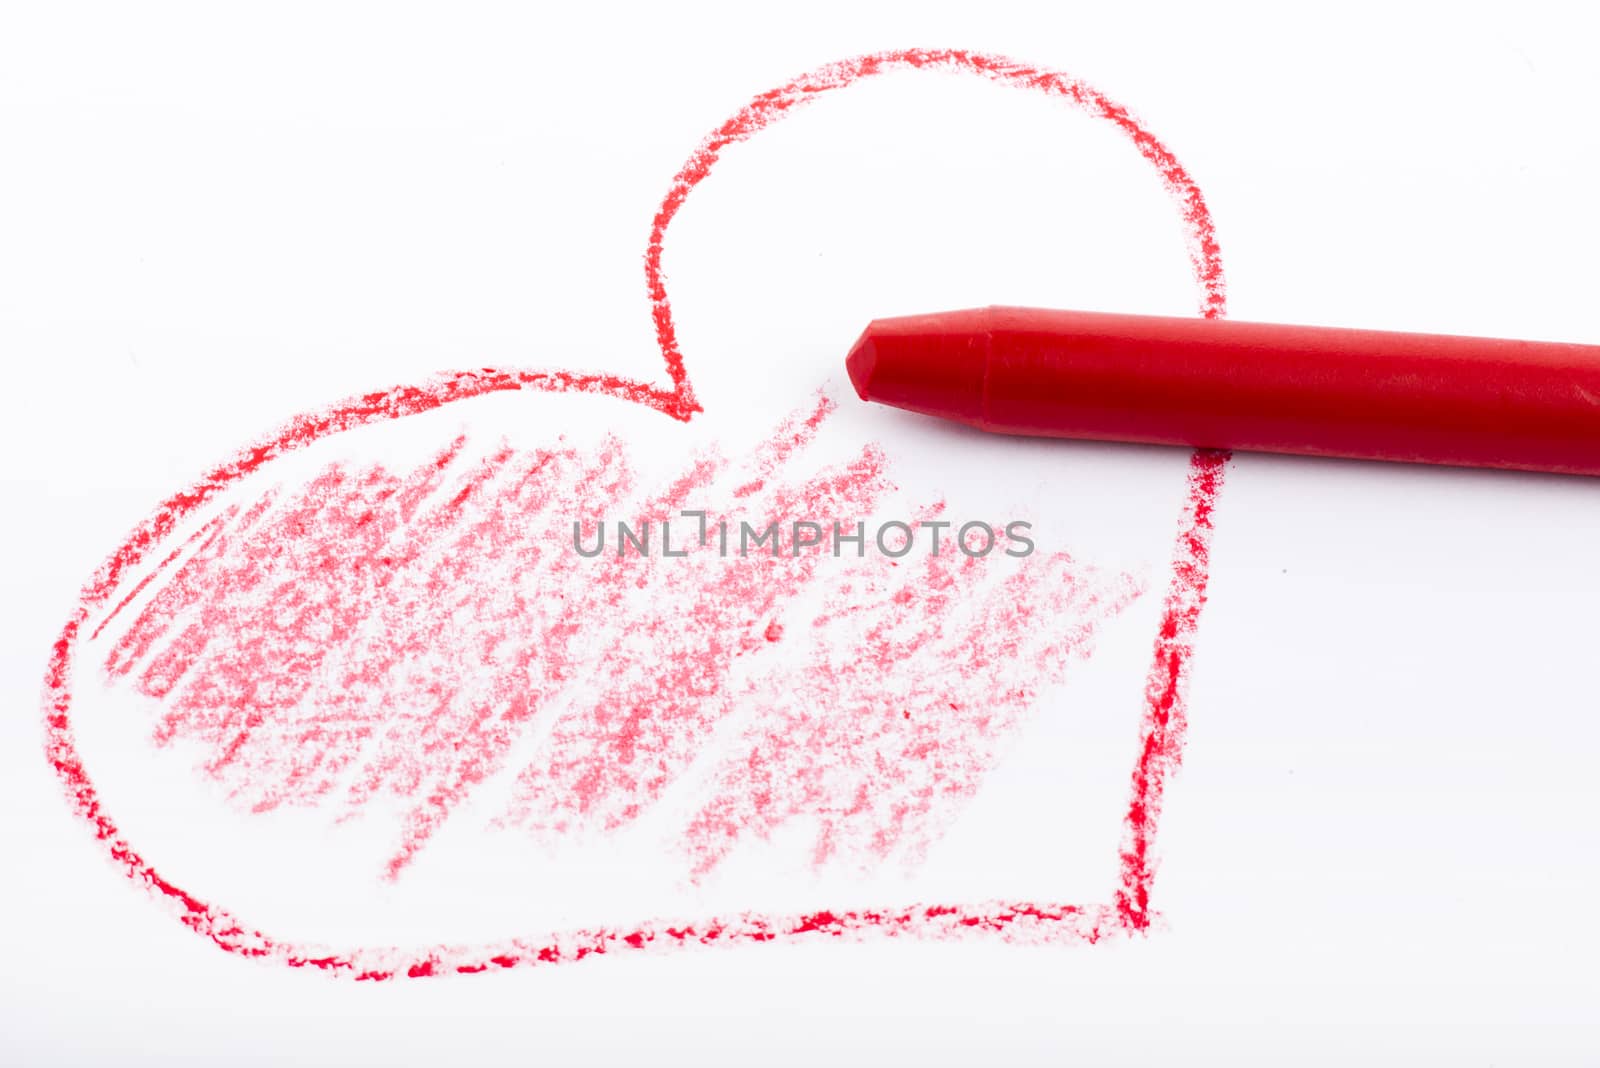 Closeup of a red pencil drawing a heart. On white paper.